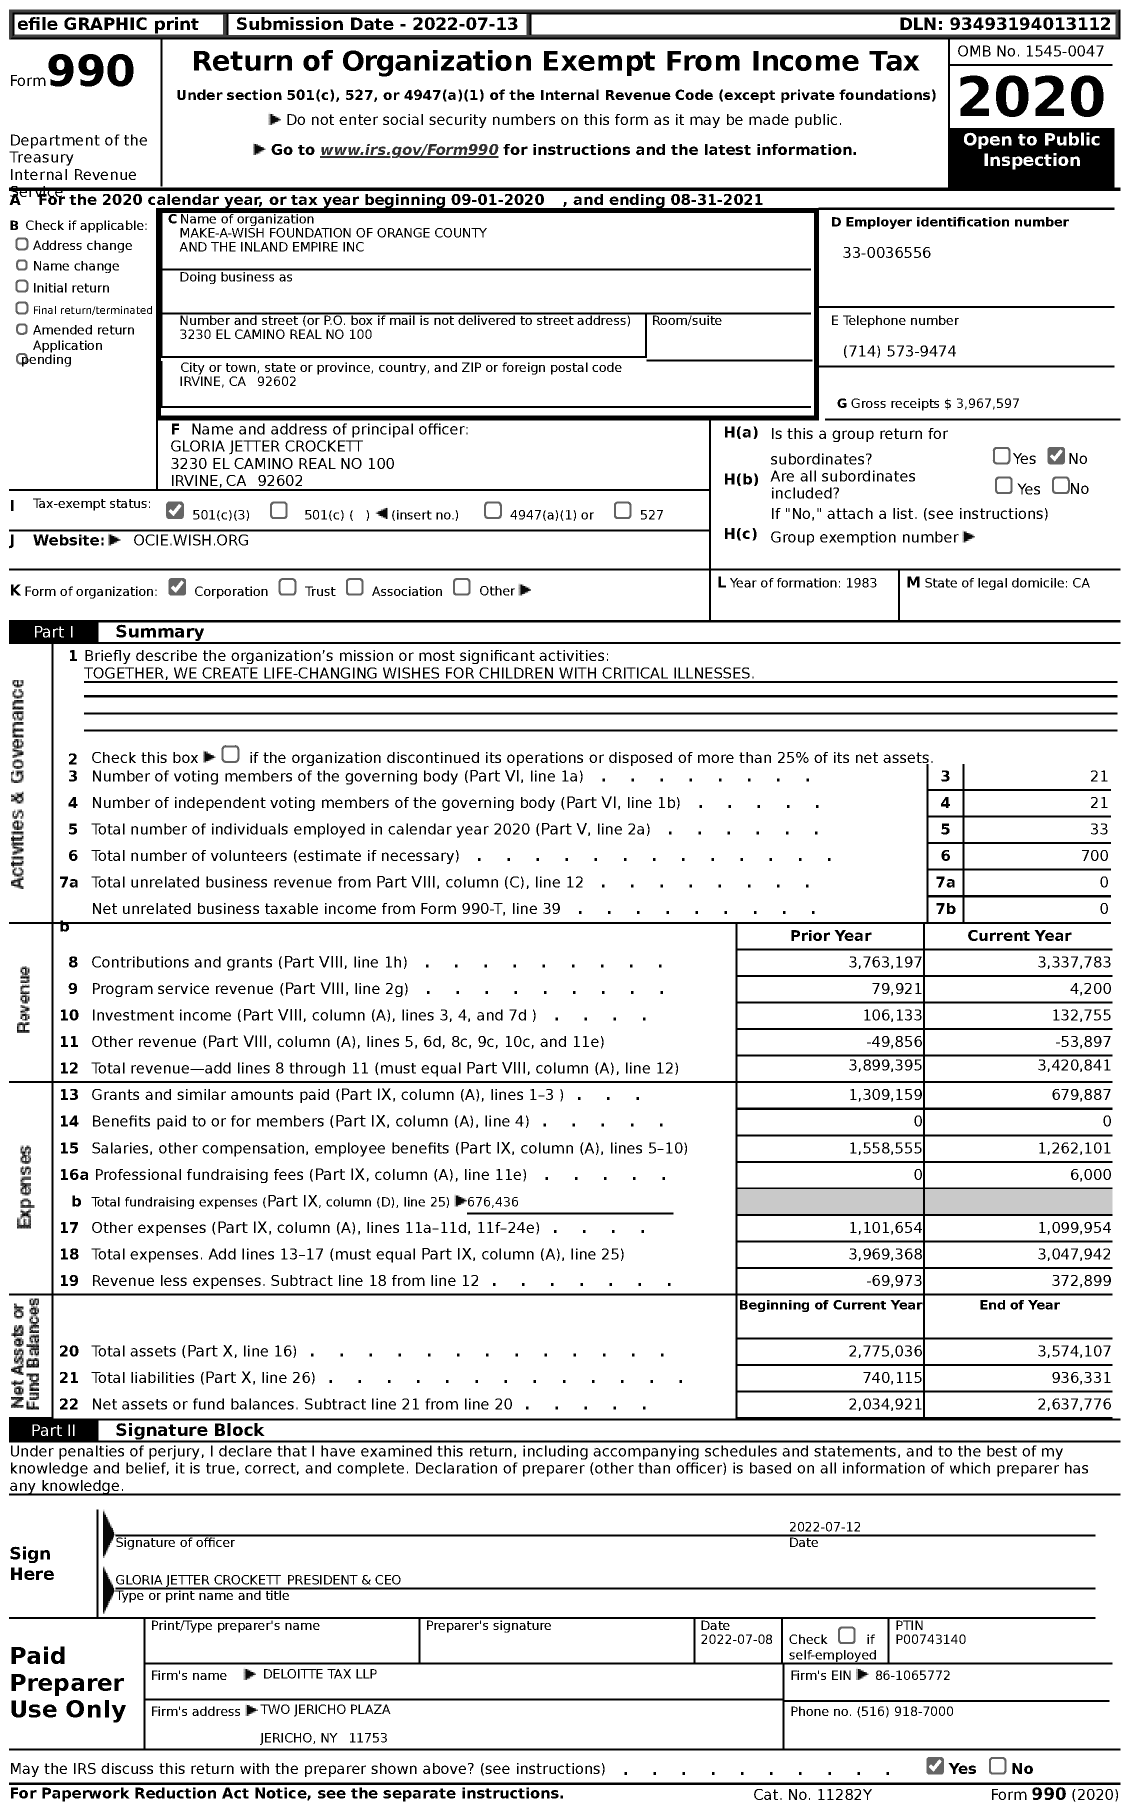 Image of first page of 2020 Form 990 for Make-A-Wish Foundation of Orange County and the Inland Empire